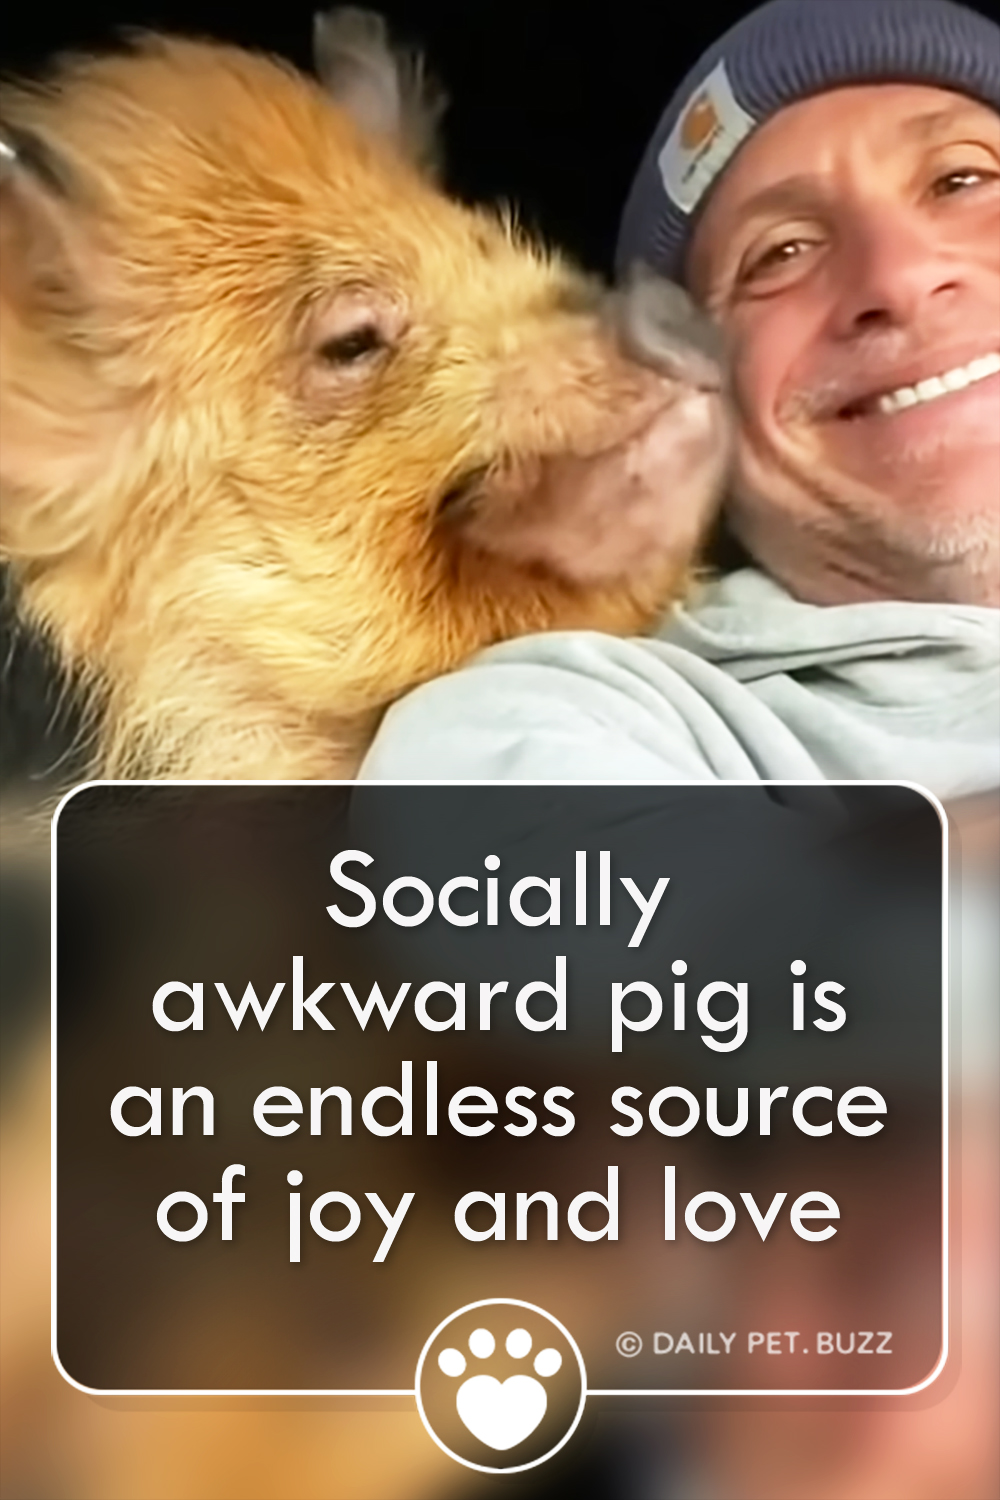 Socially awkward pig is an endless source of joy and love